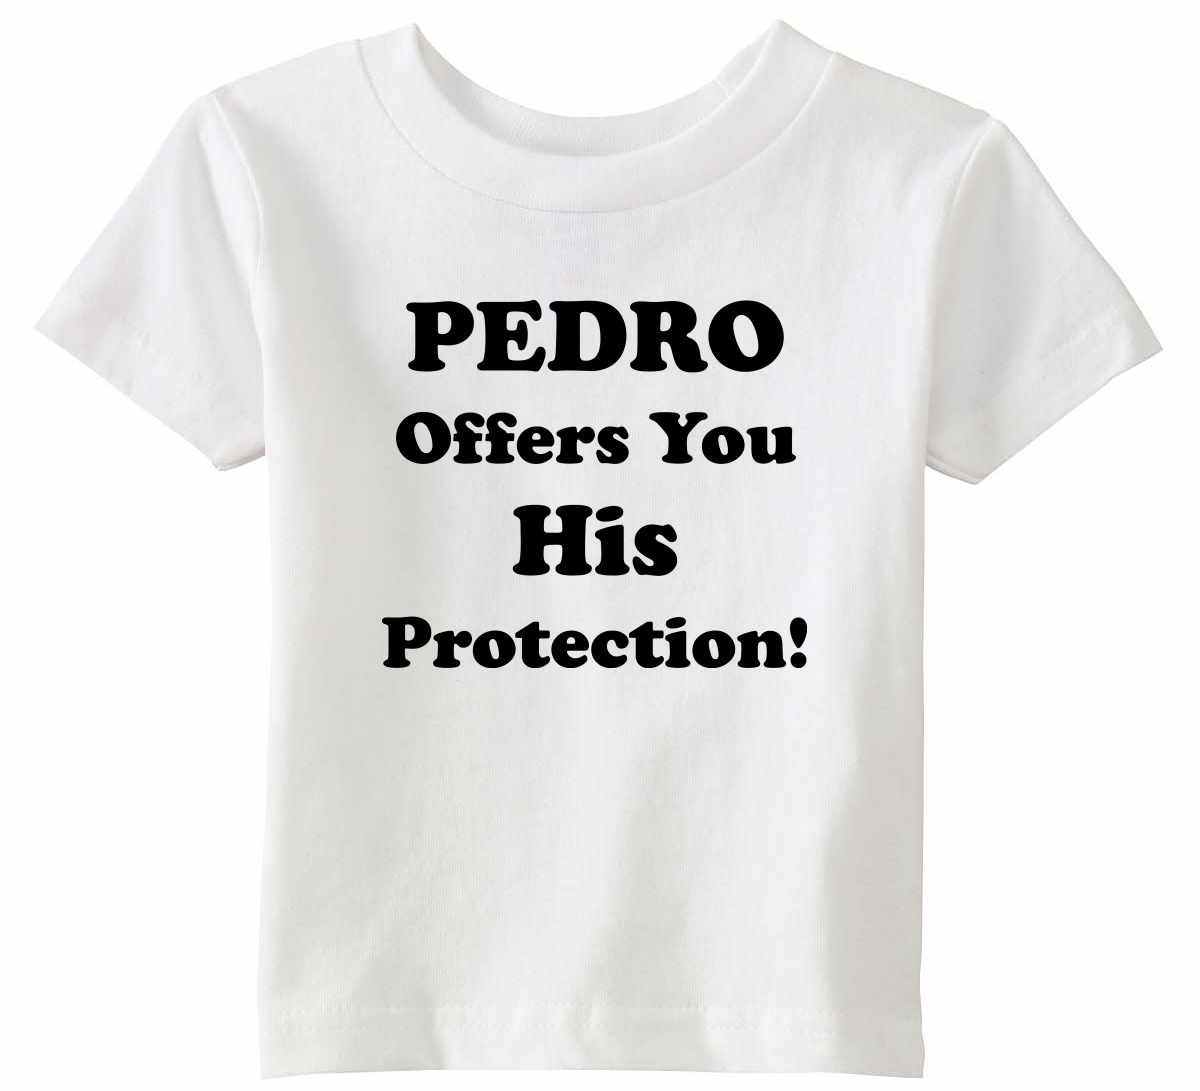 PEDRO OFFERS YOU HIS PROTECTION on Infant-Toddler T-Shirt